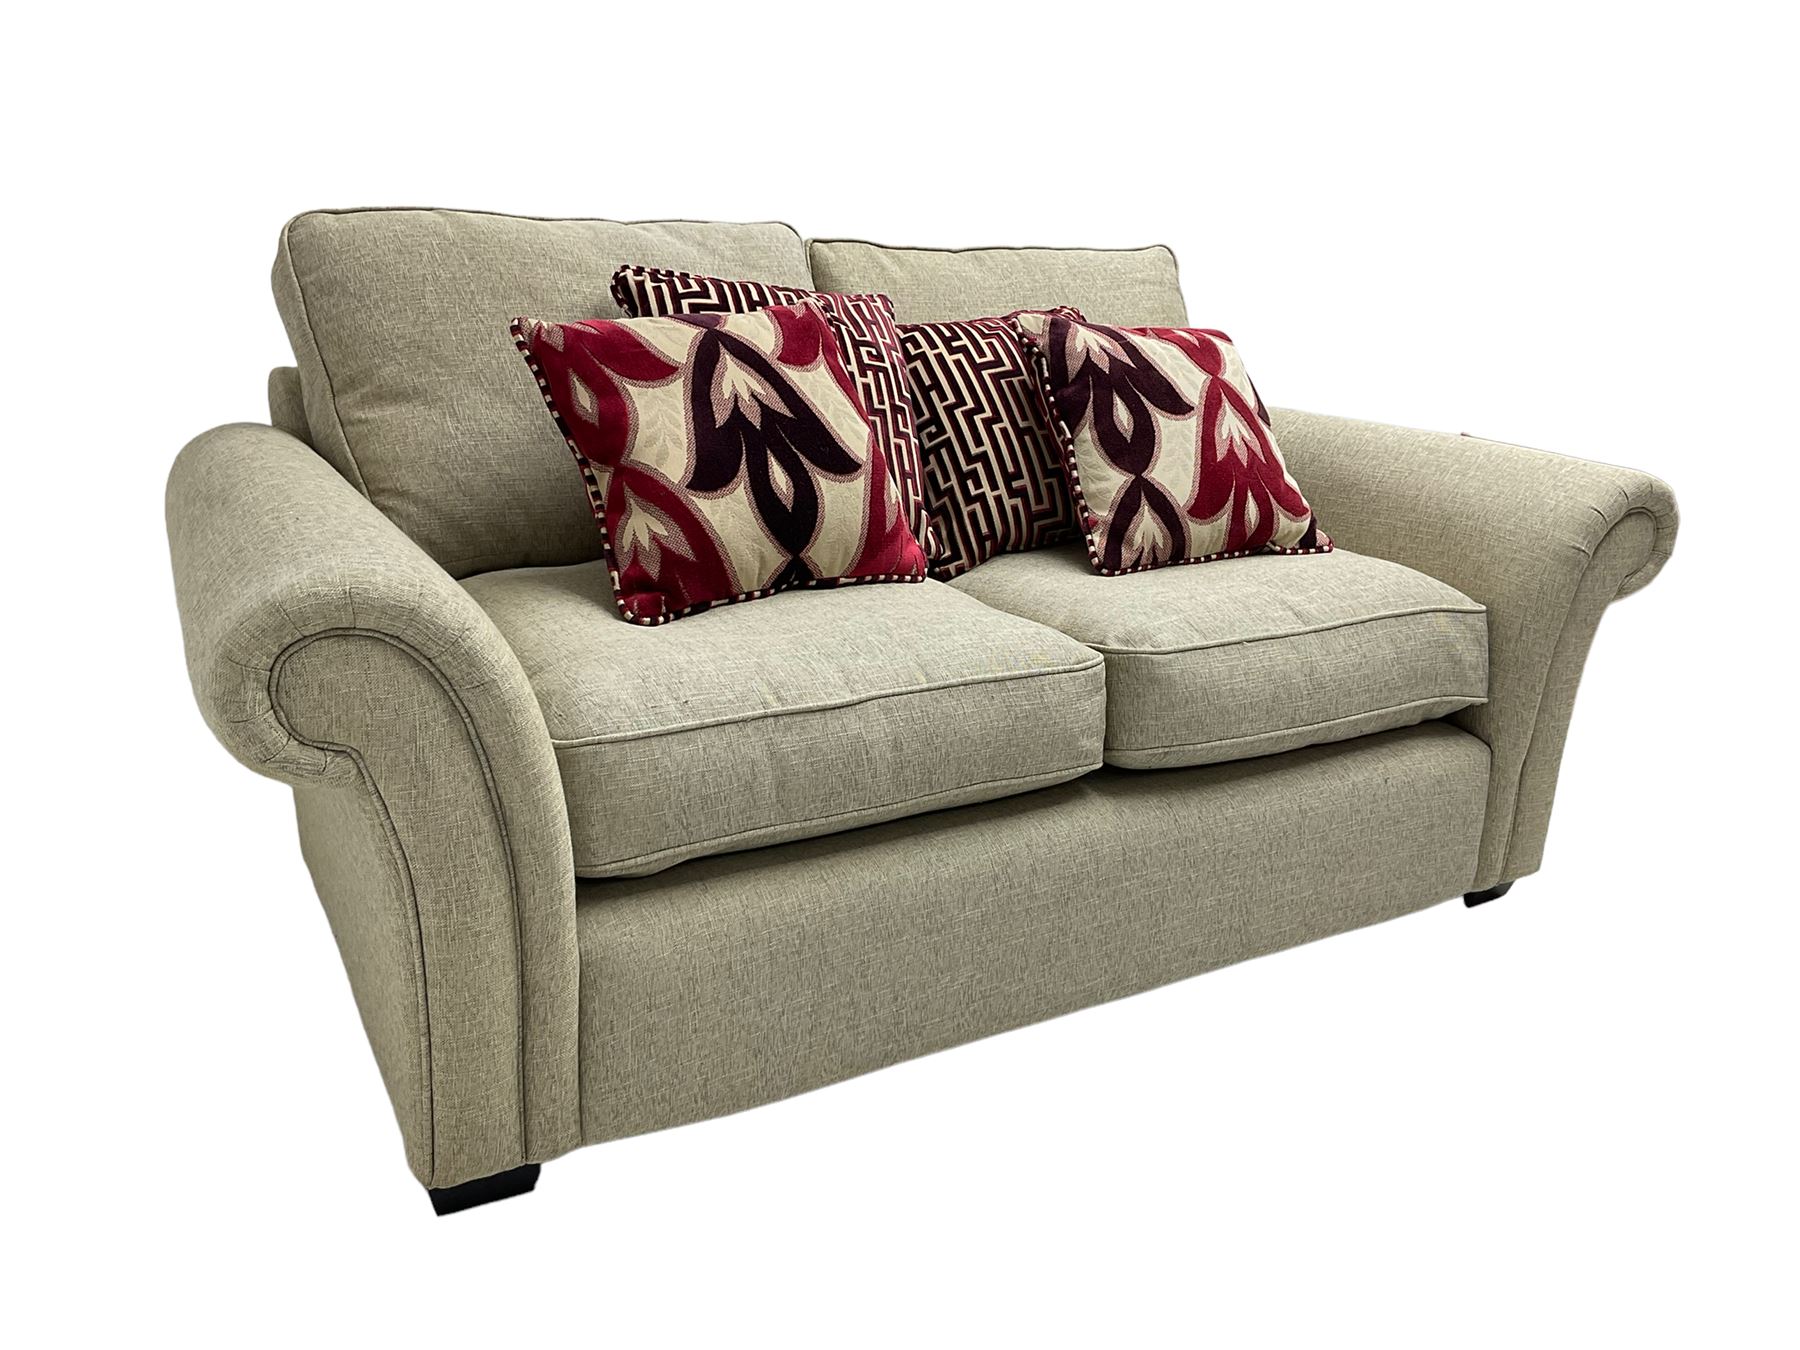 Two seater sofa - Image 5 of 6